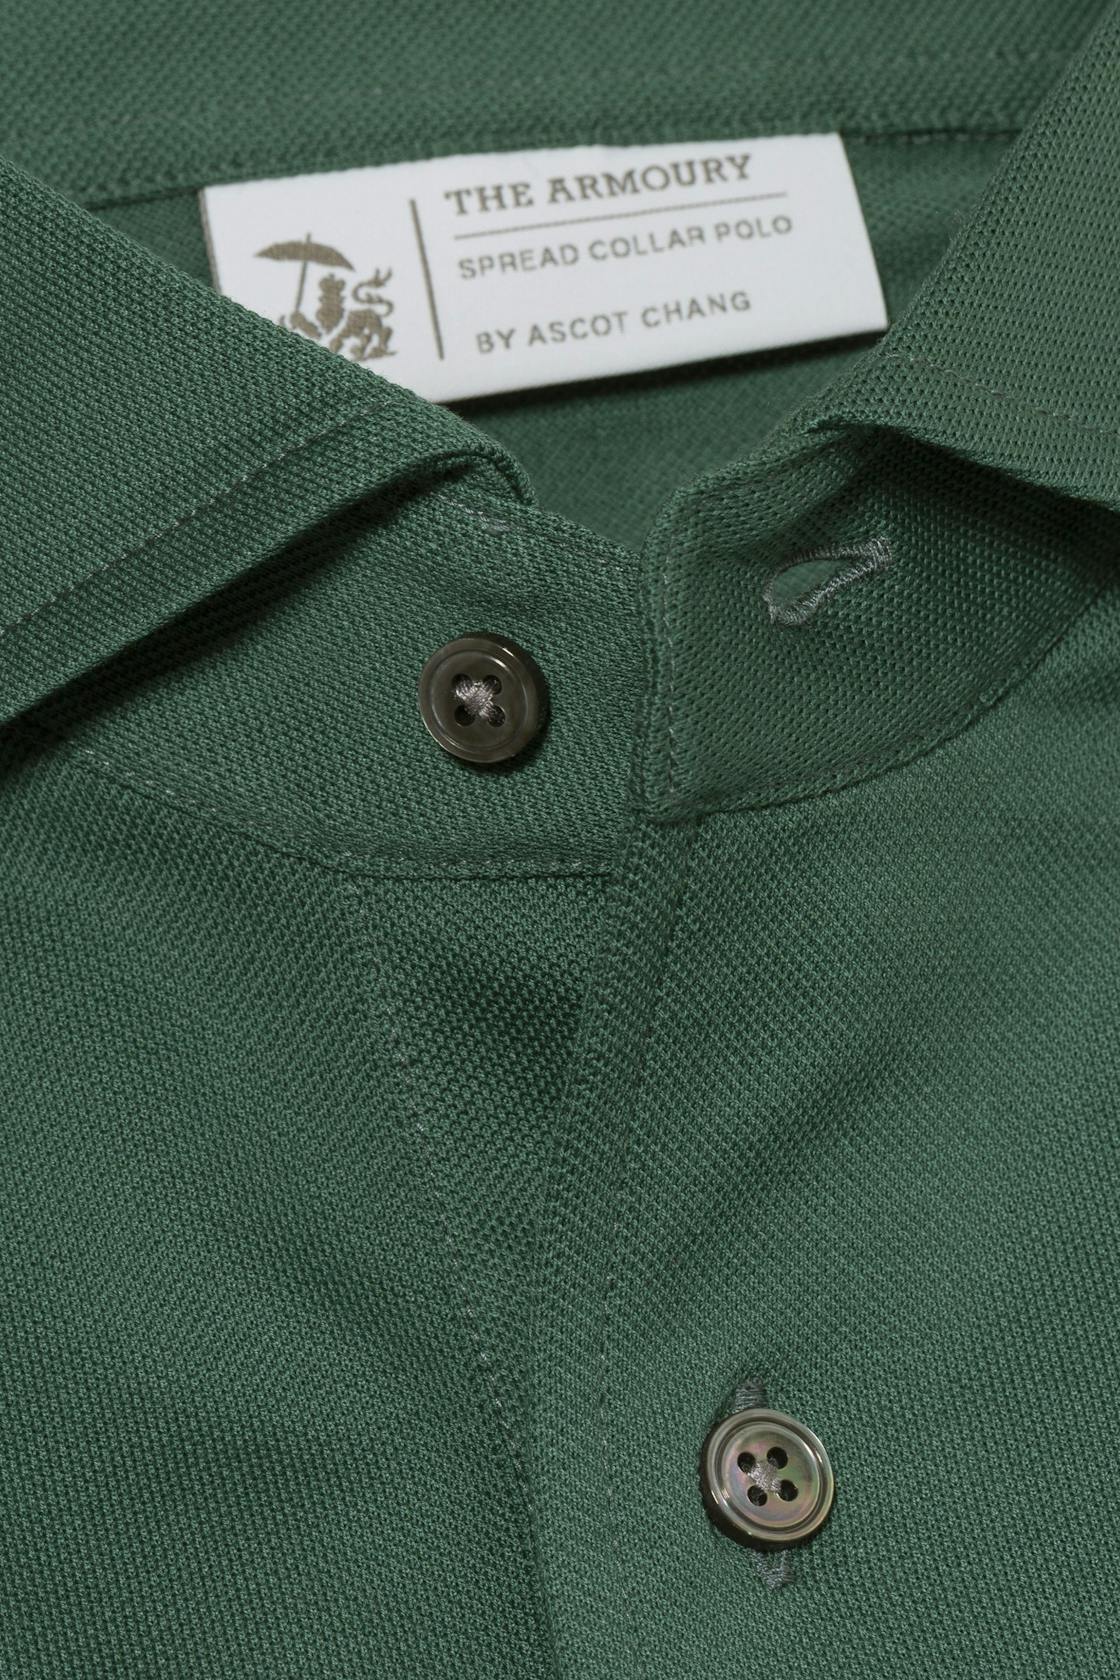 The Armoury by Ascot Chang Green Cotton Long Sleeve Spread Collar Polo